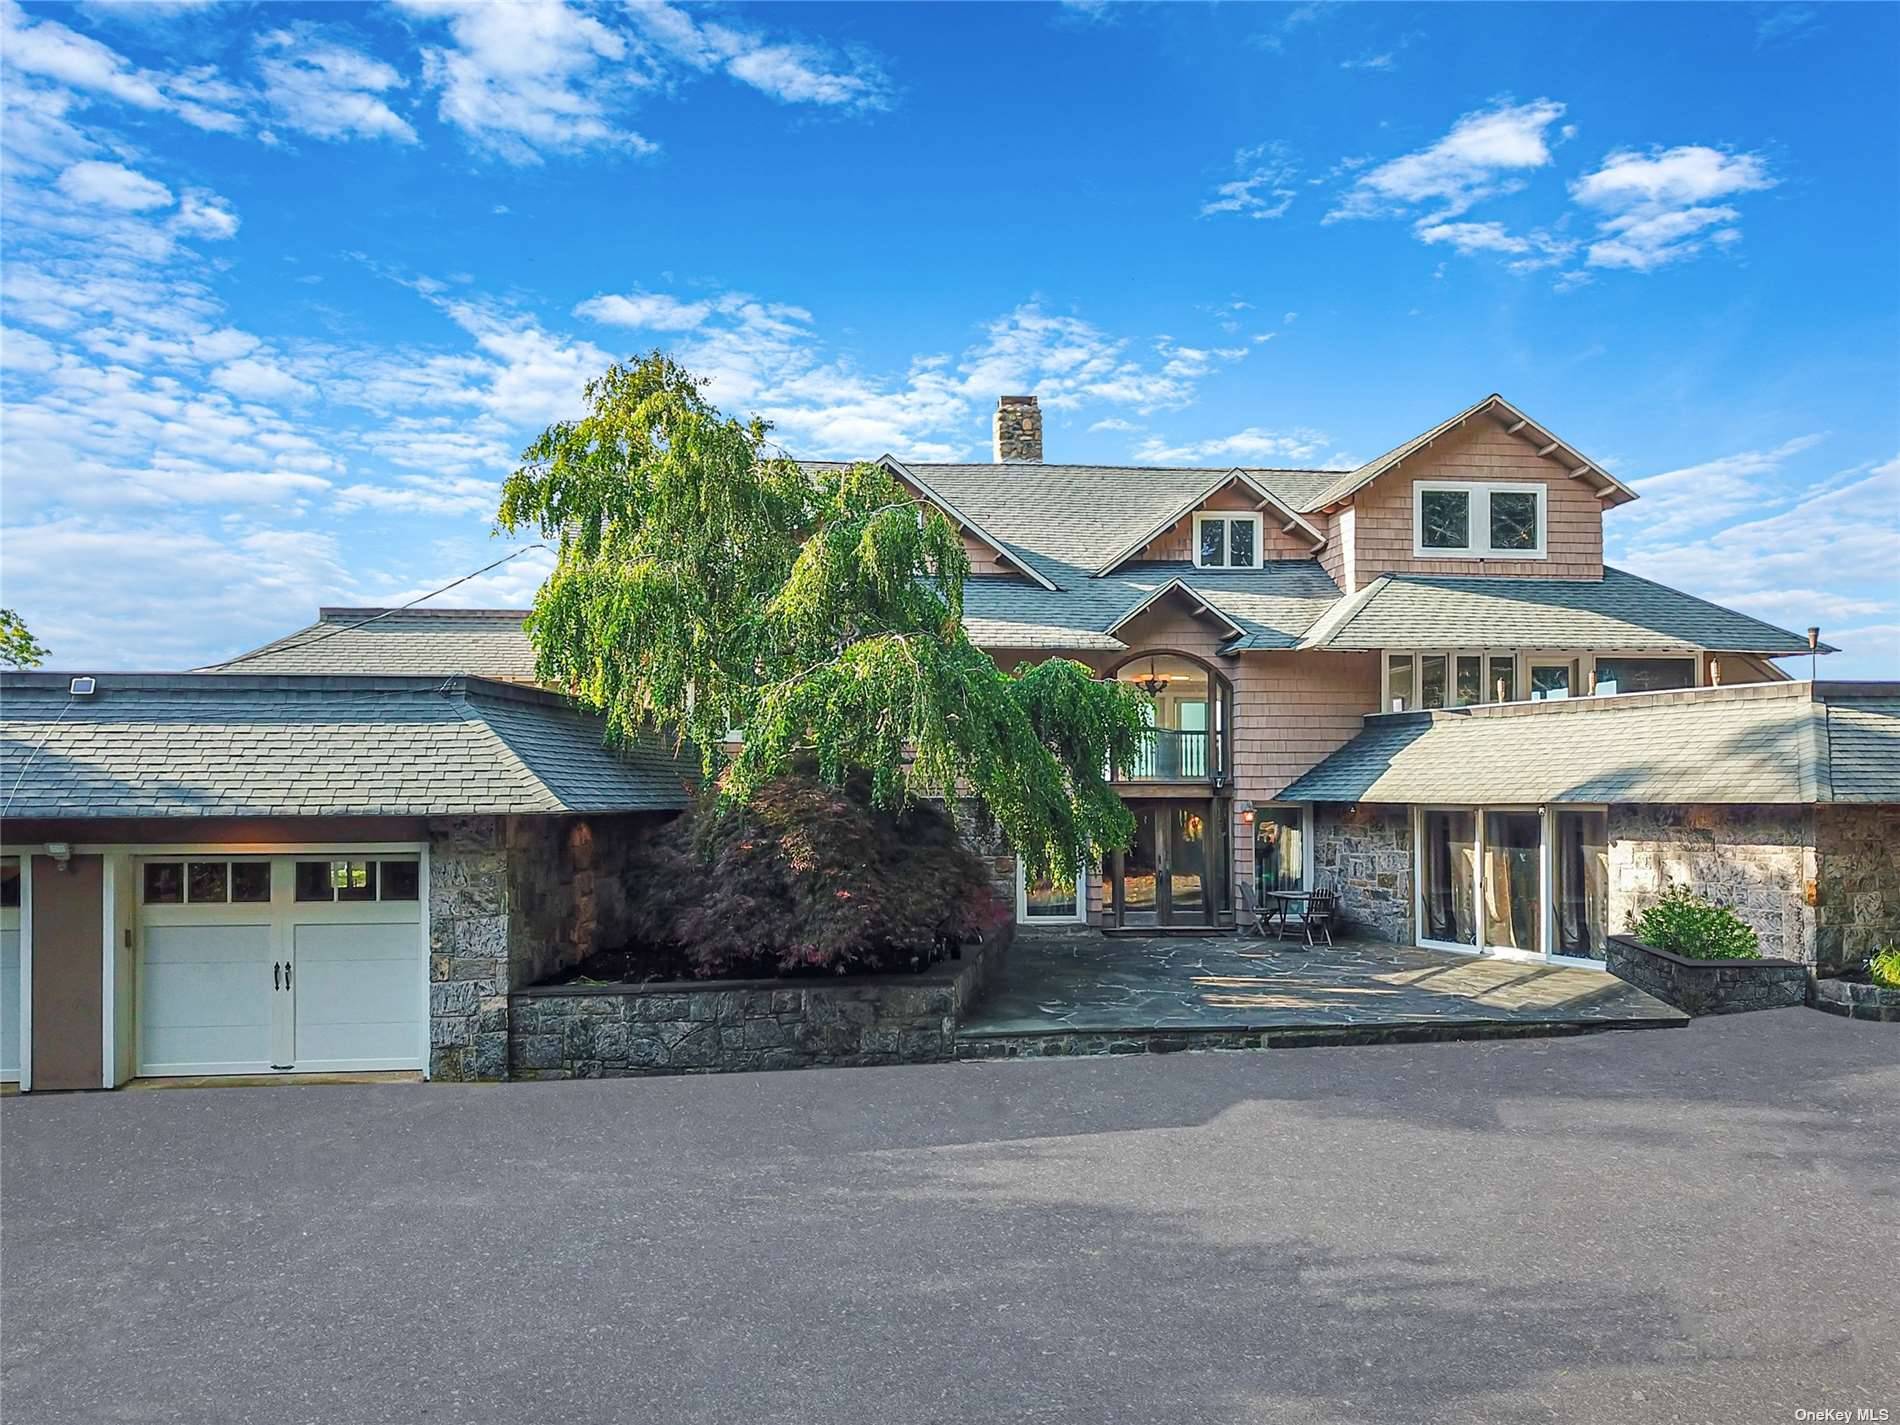 Welcome To 137 Briarcliff rd, Shoreham Village, This Breathtaking 6 Bedrooms 6 Bathrooms Custom Built Waterfront Estate Has Unobstructed Water Views From Just About Every Room !